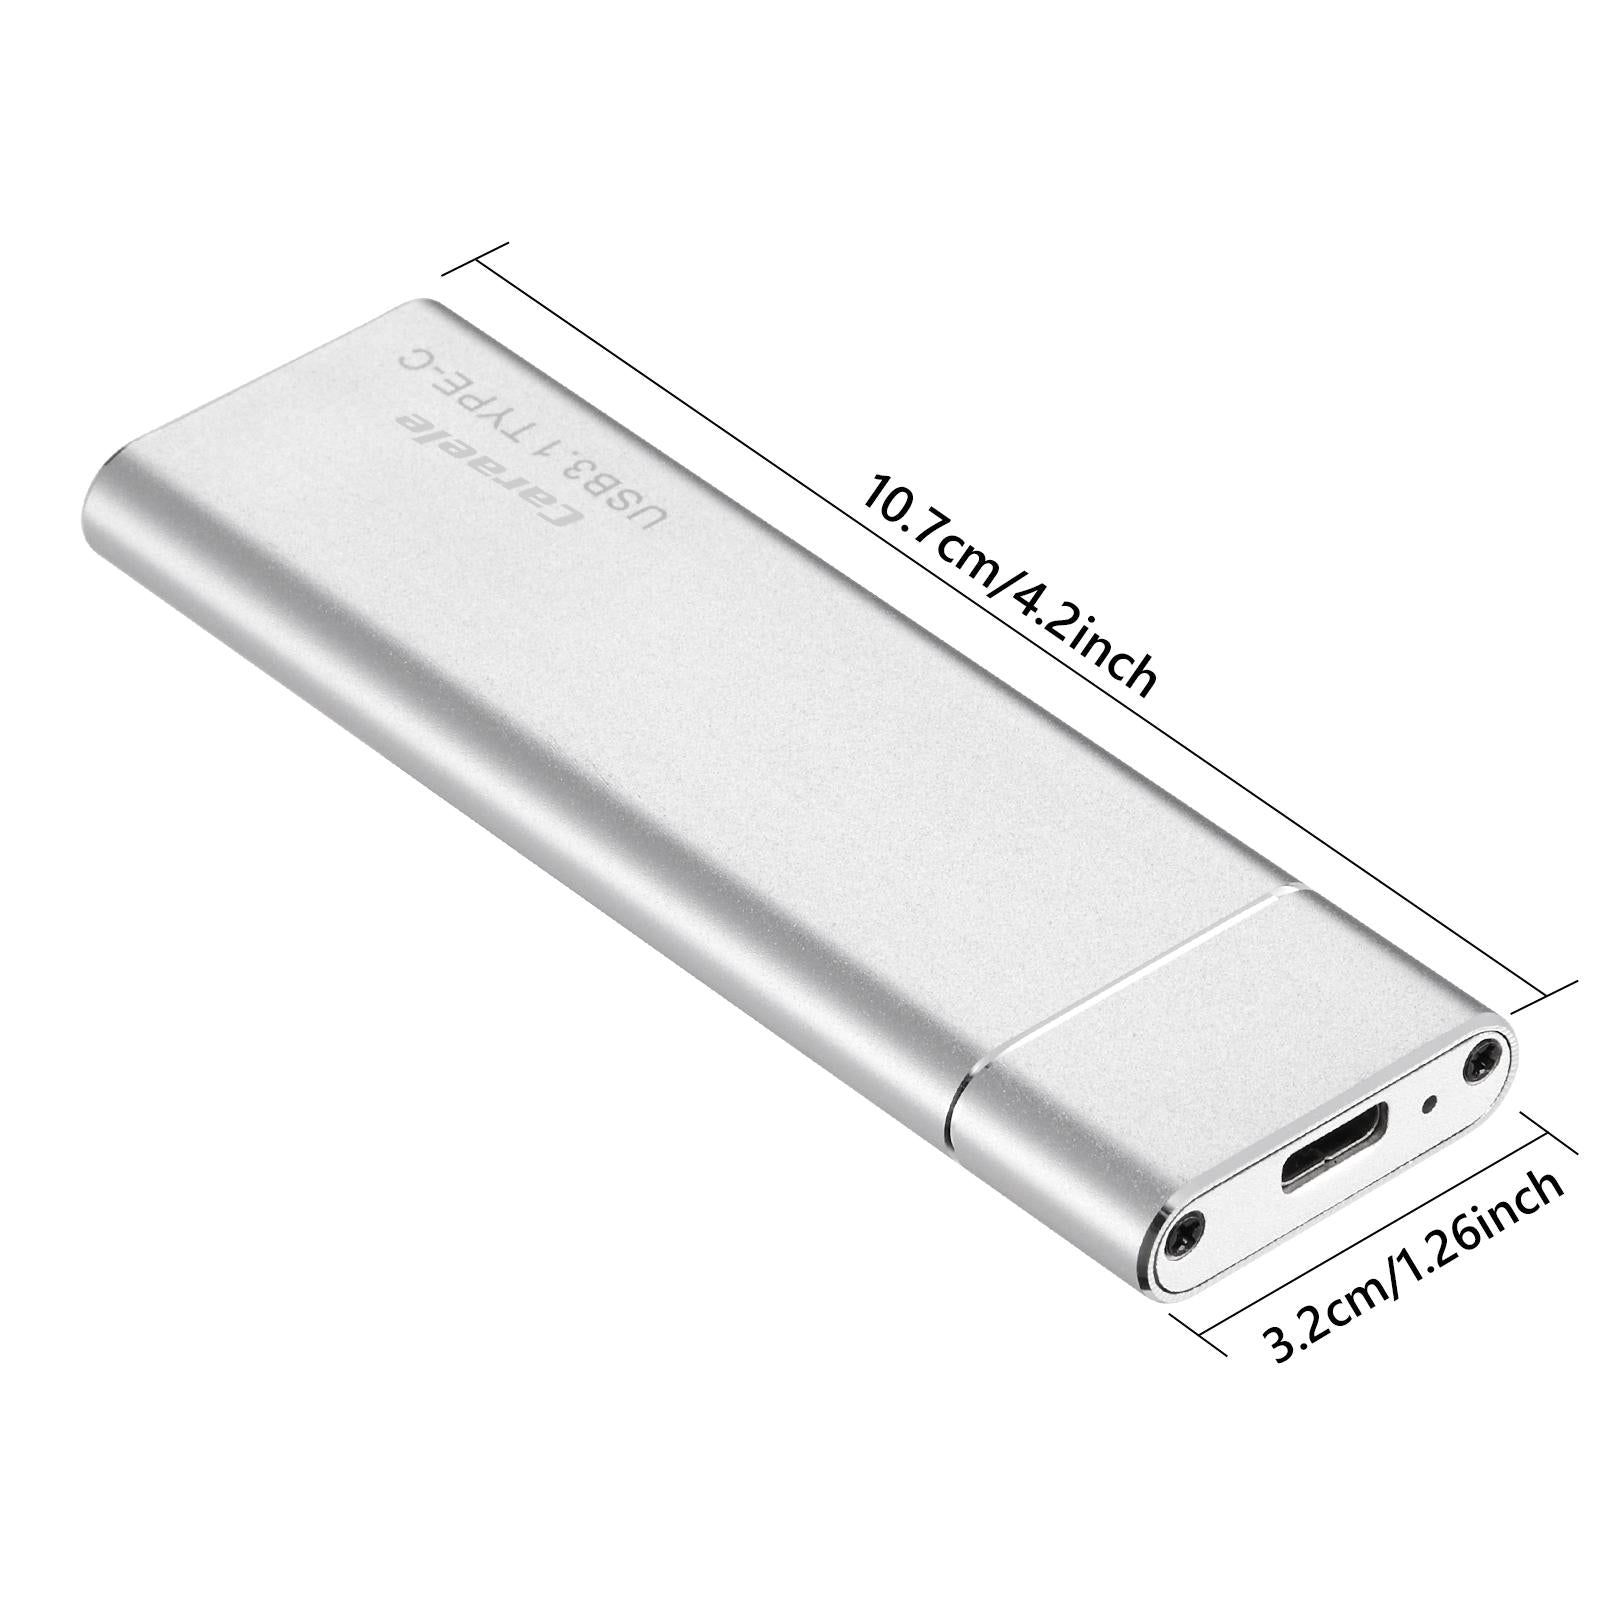 Portable 2TB External SSD Solid State Drive Typc C USB3.1 Compact Silver